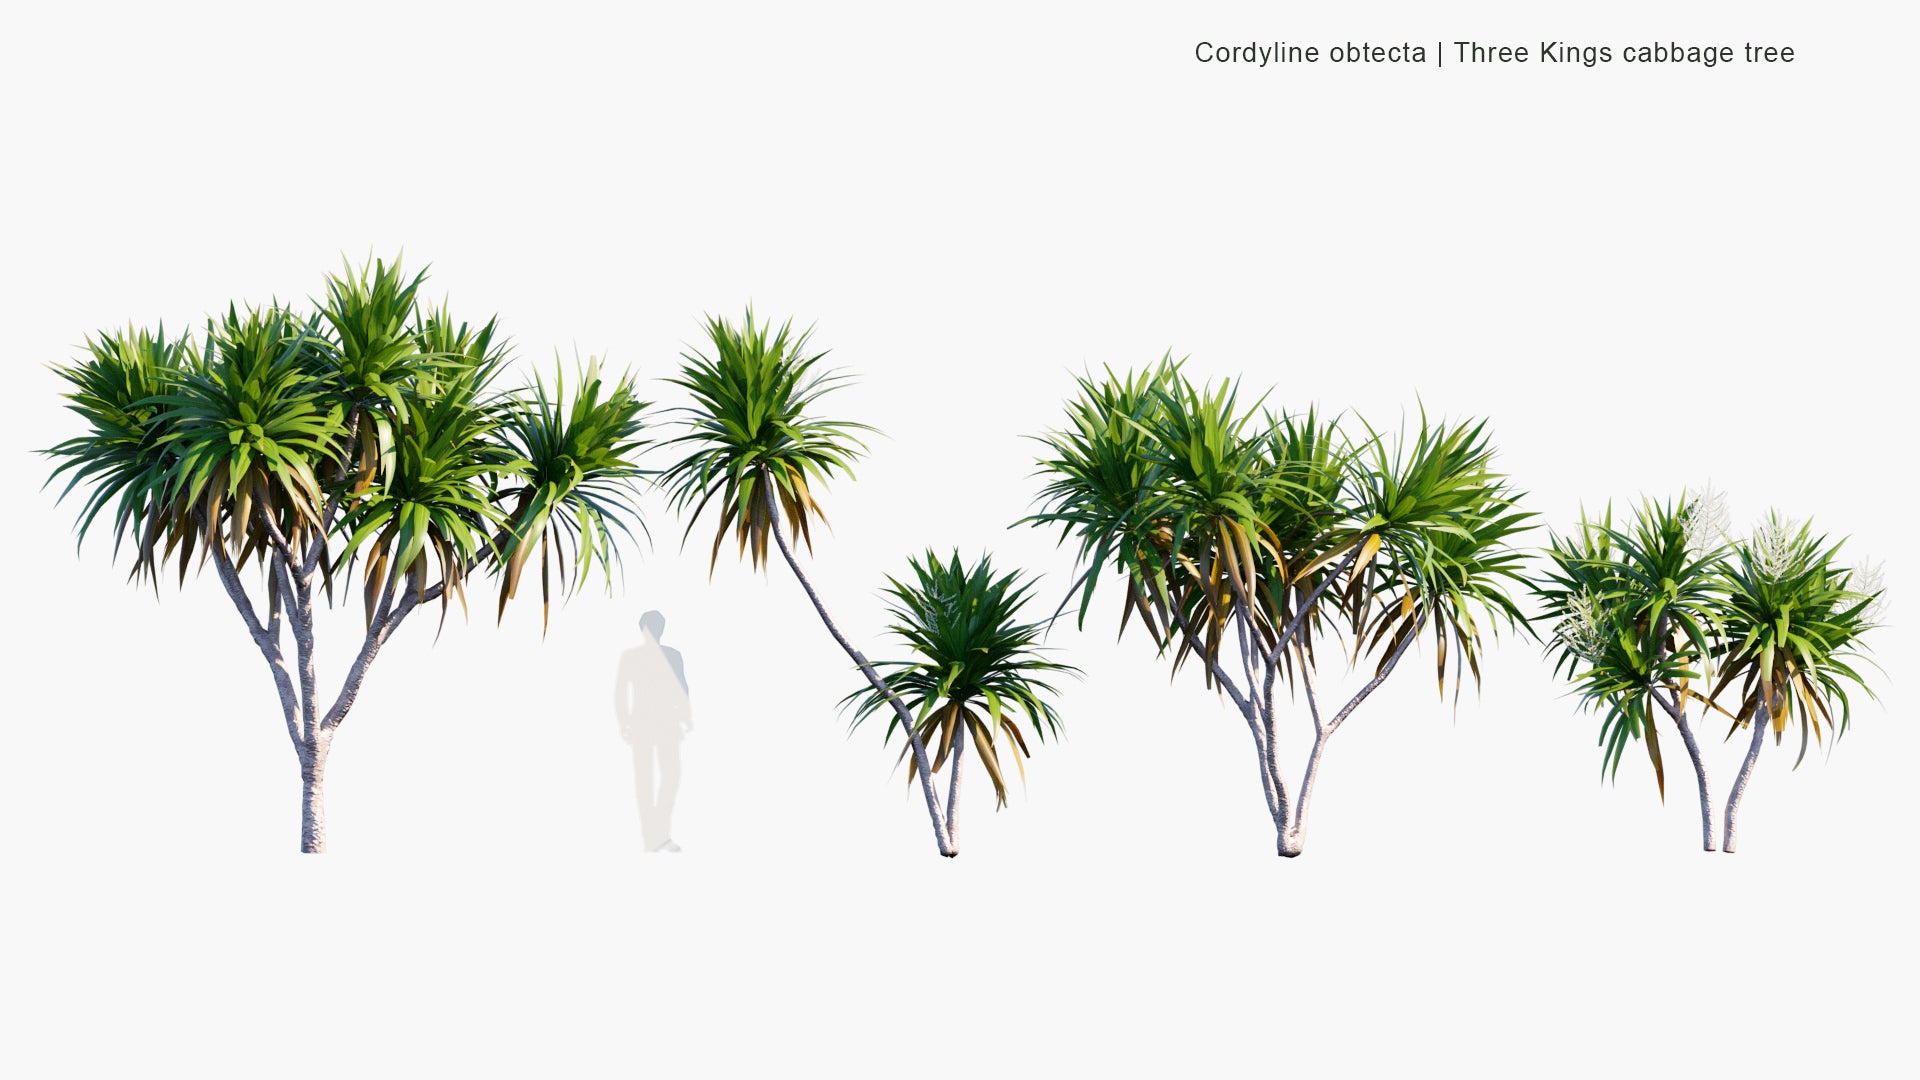 Low Poly Cordyline Obtecta - Ti, Norfolk Island Cabbage Tree, Three Kings Cabbage Tree (3D Model)